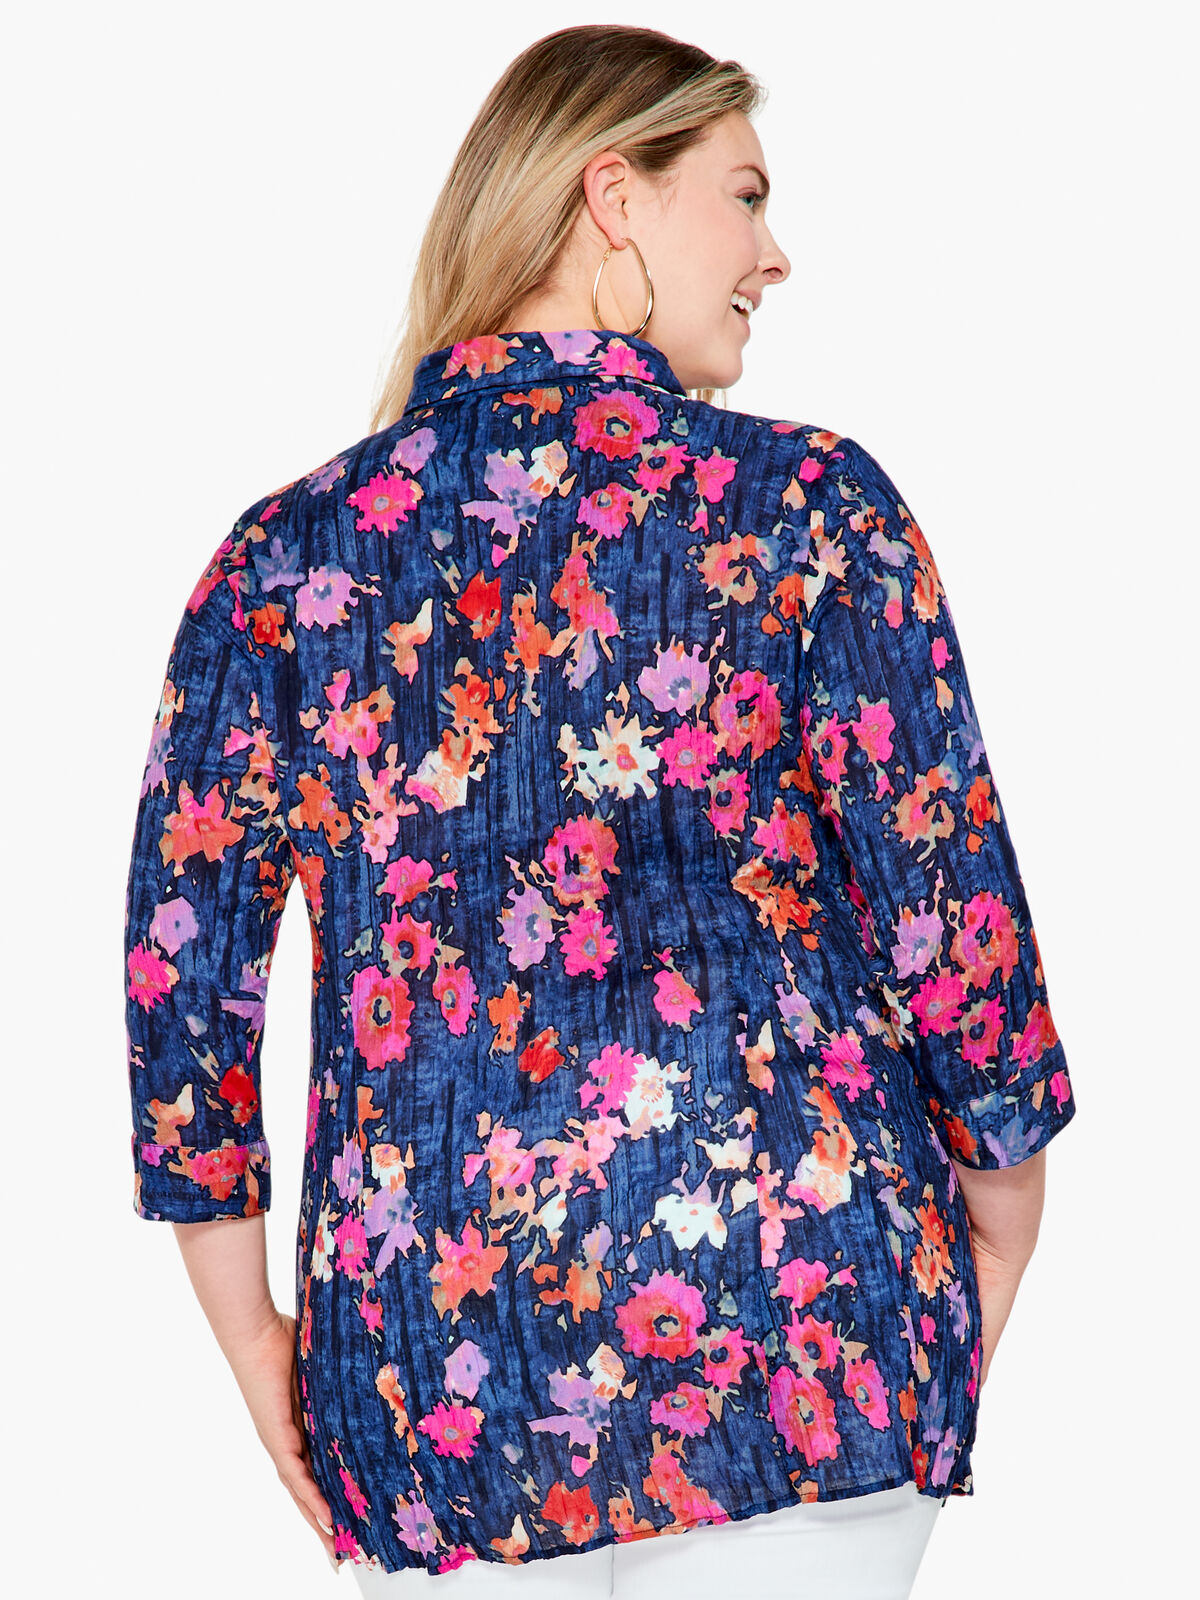 Glowing Blossoms Crinkle Top